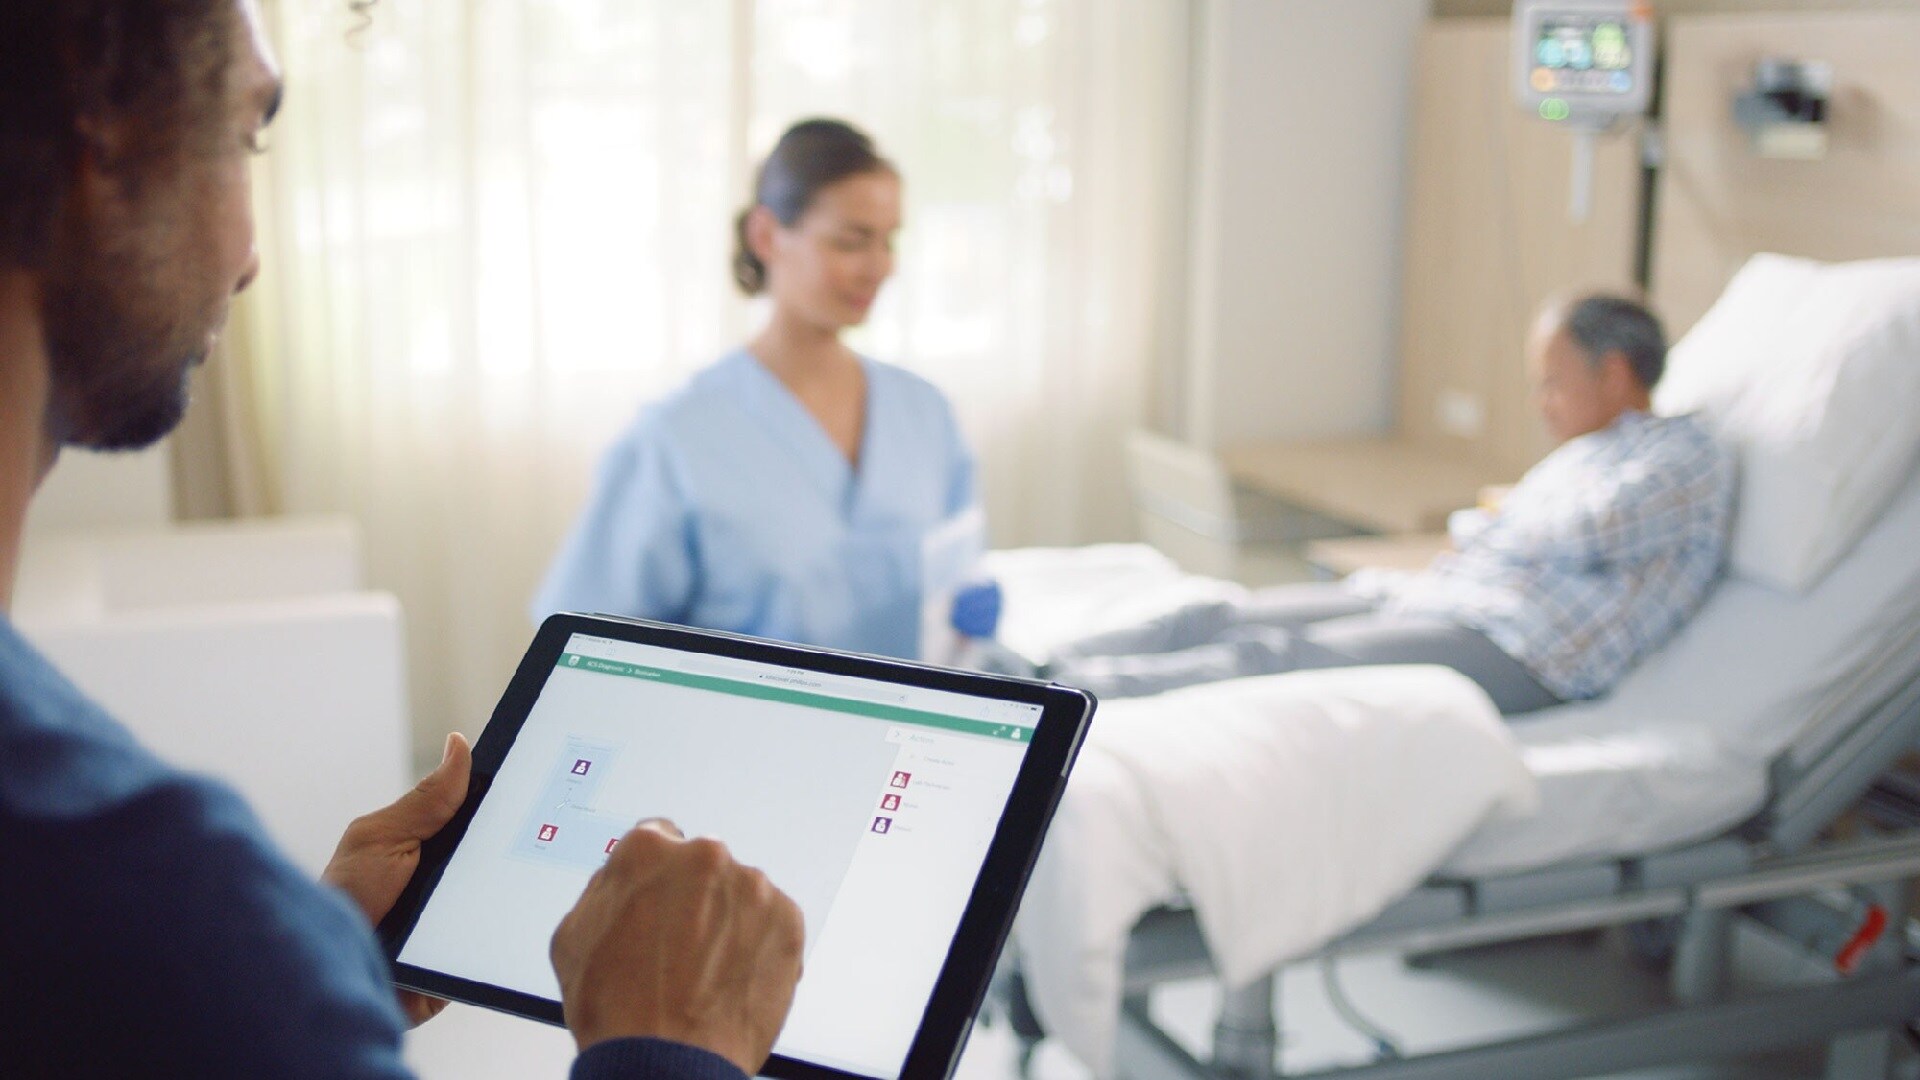 Transitioning Indonesia to digital healthcare